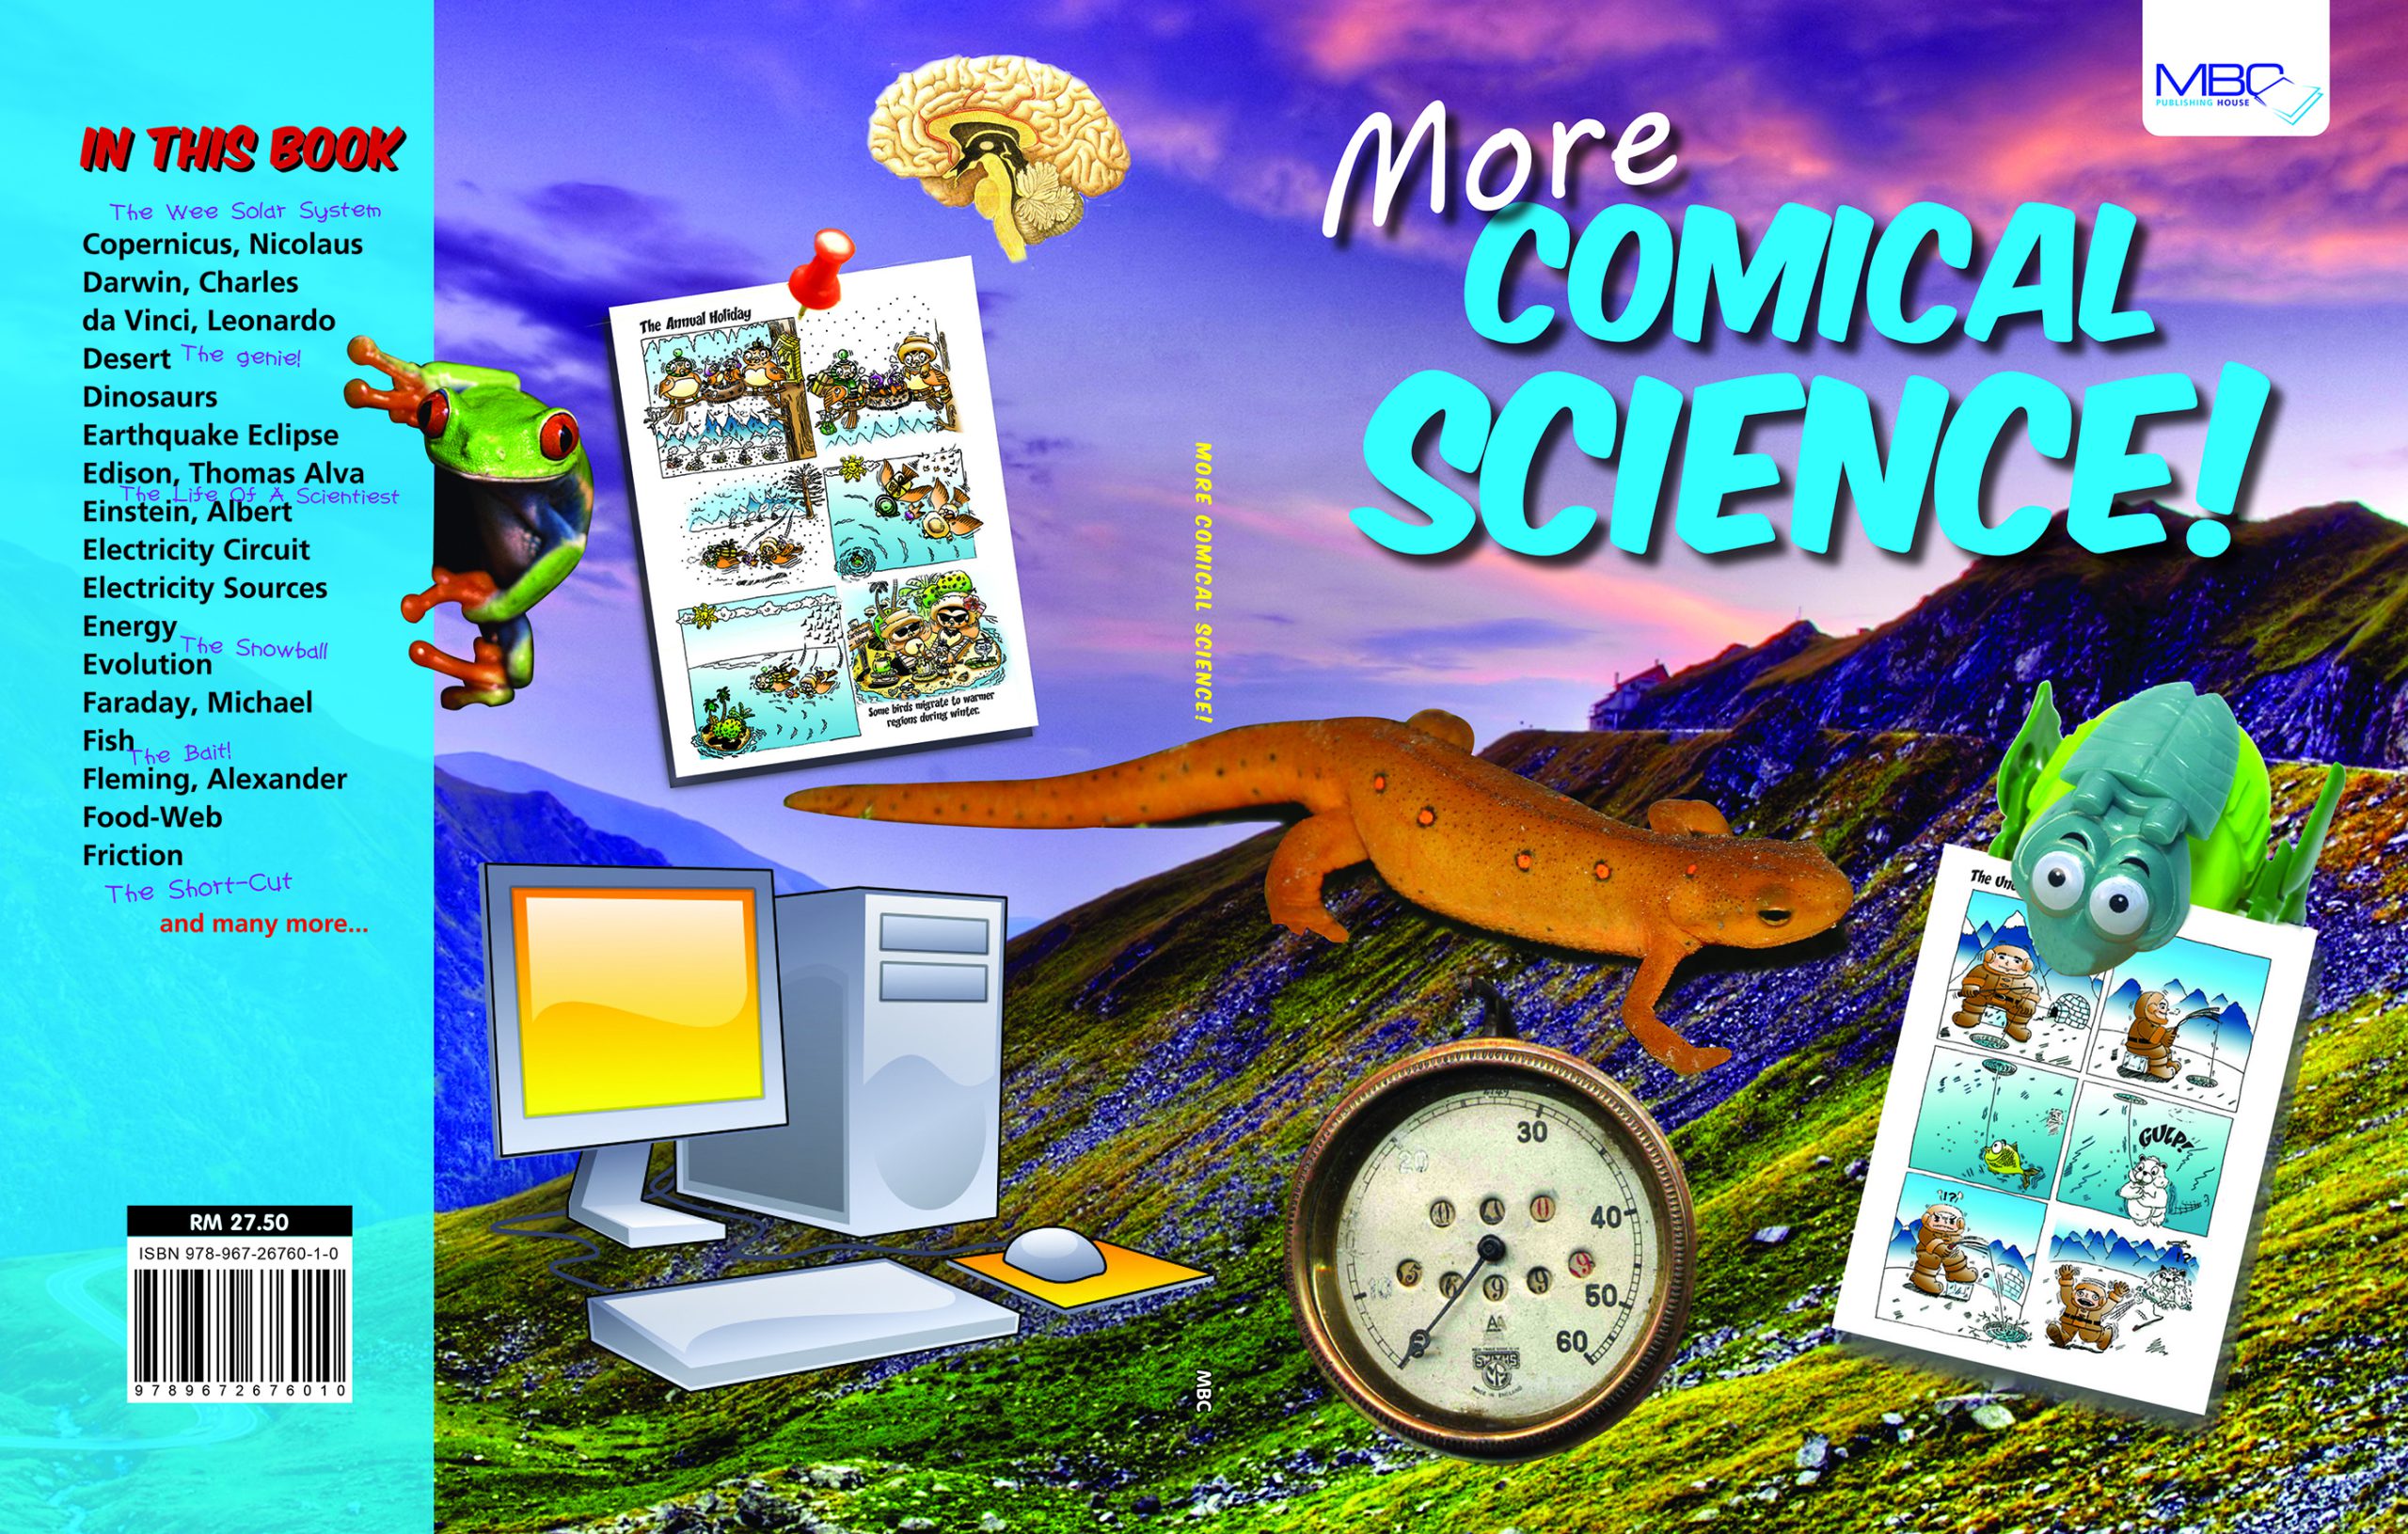 More Comical Science Cover Book 02 (2)